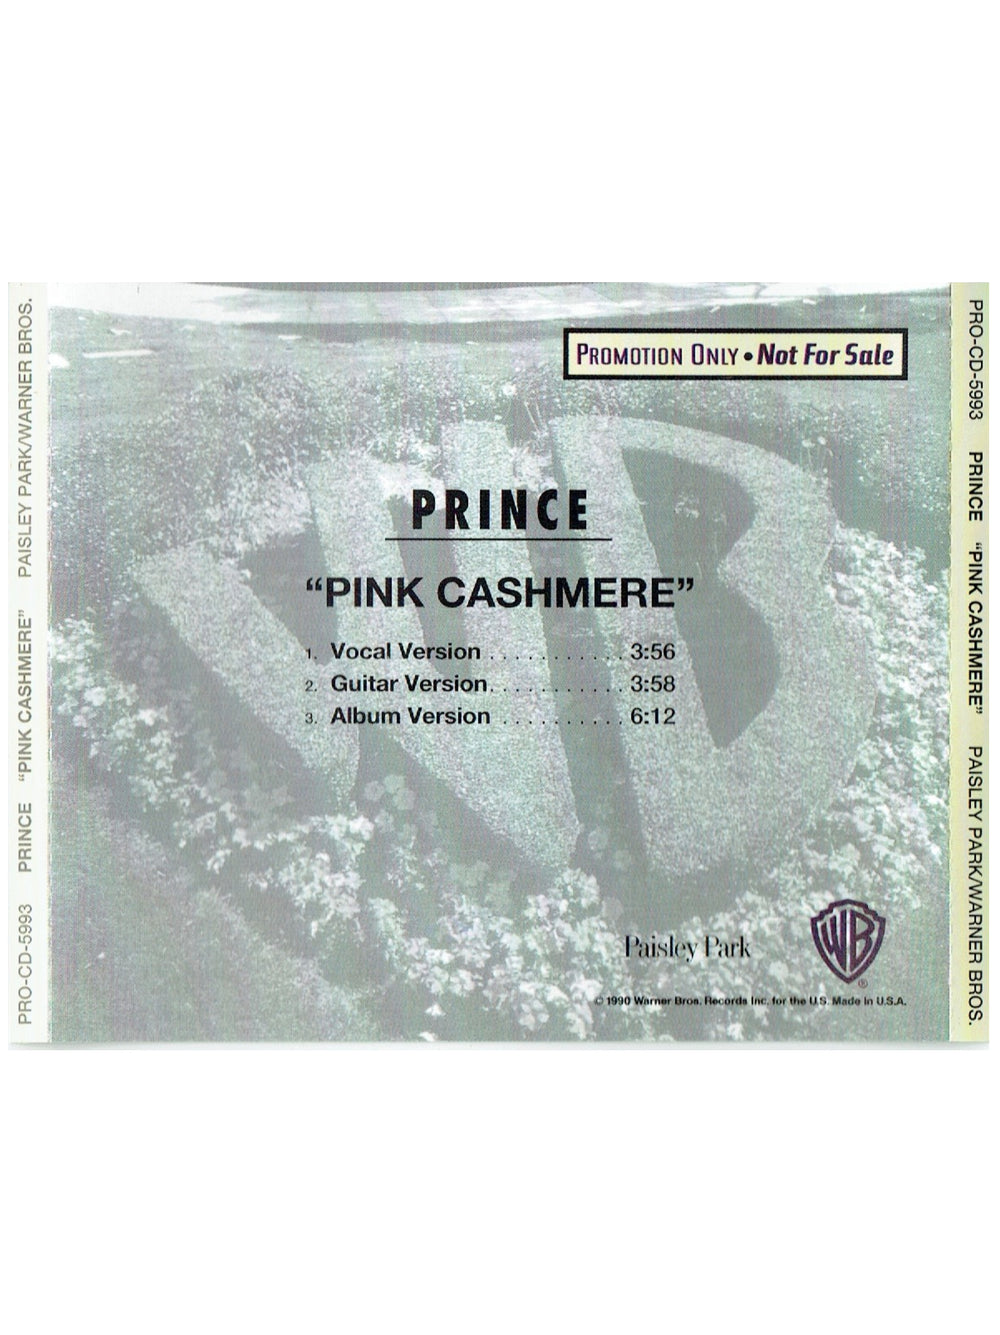 Prince – Pink Cashmere Promotional Only CD Single 3 Track USA Release 1993